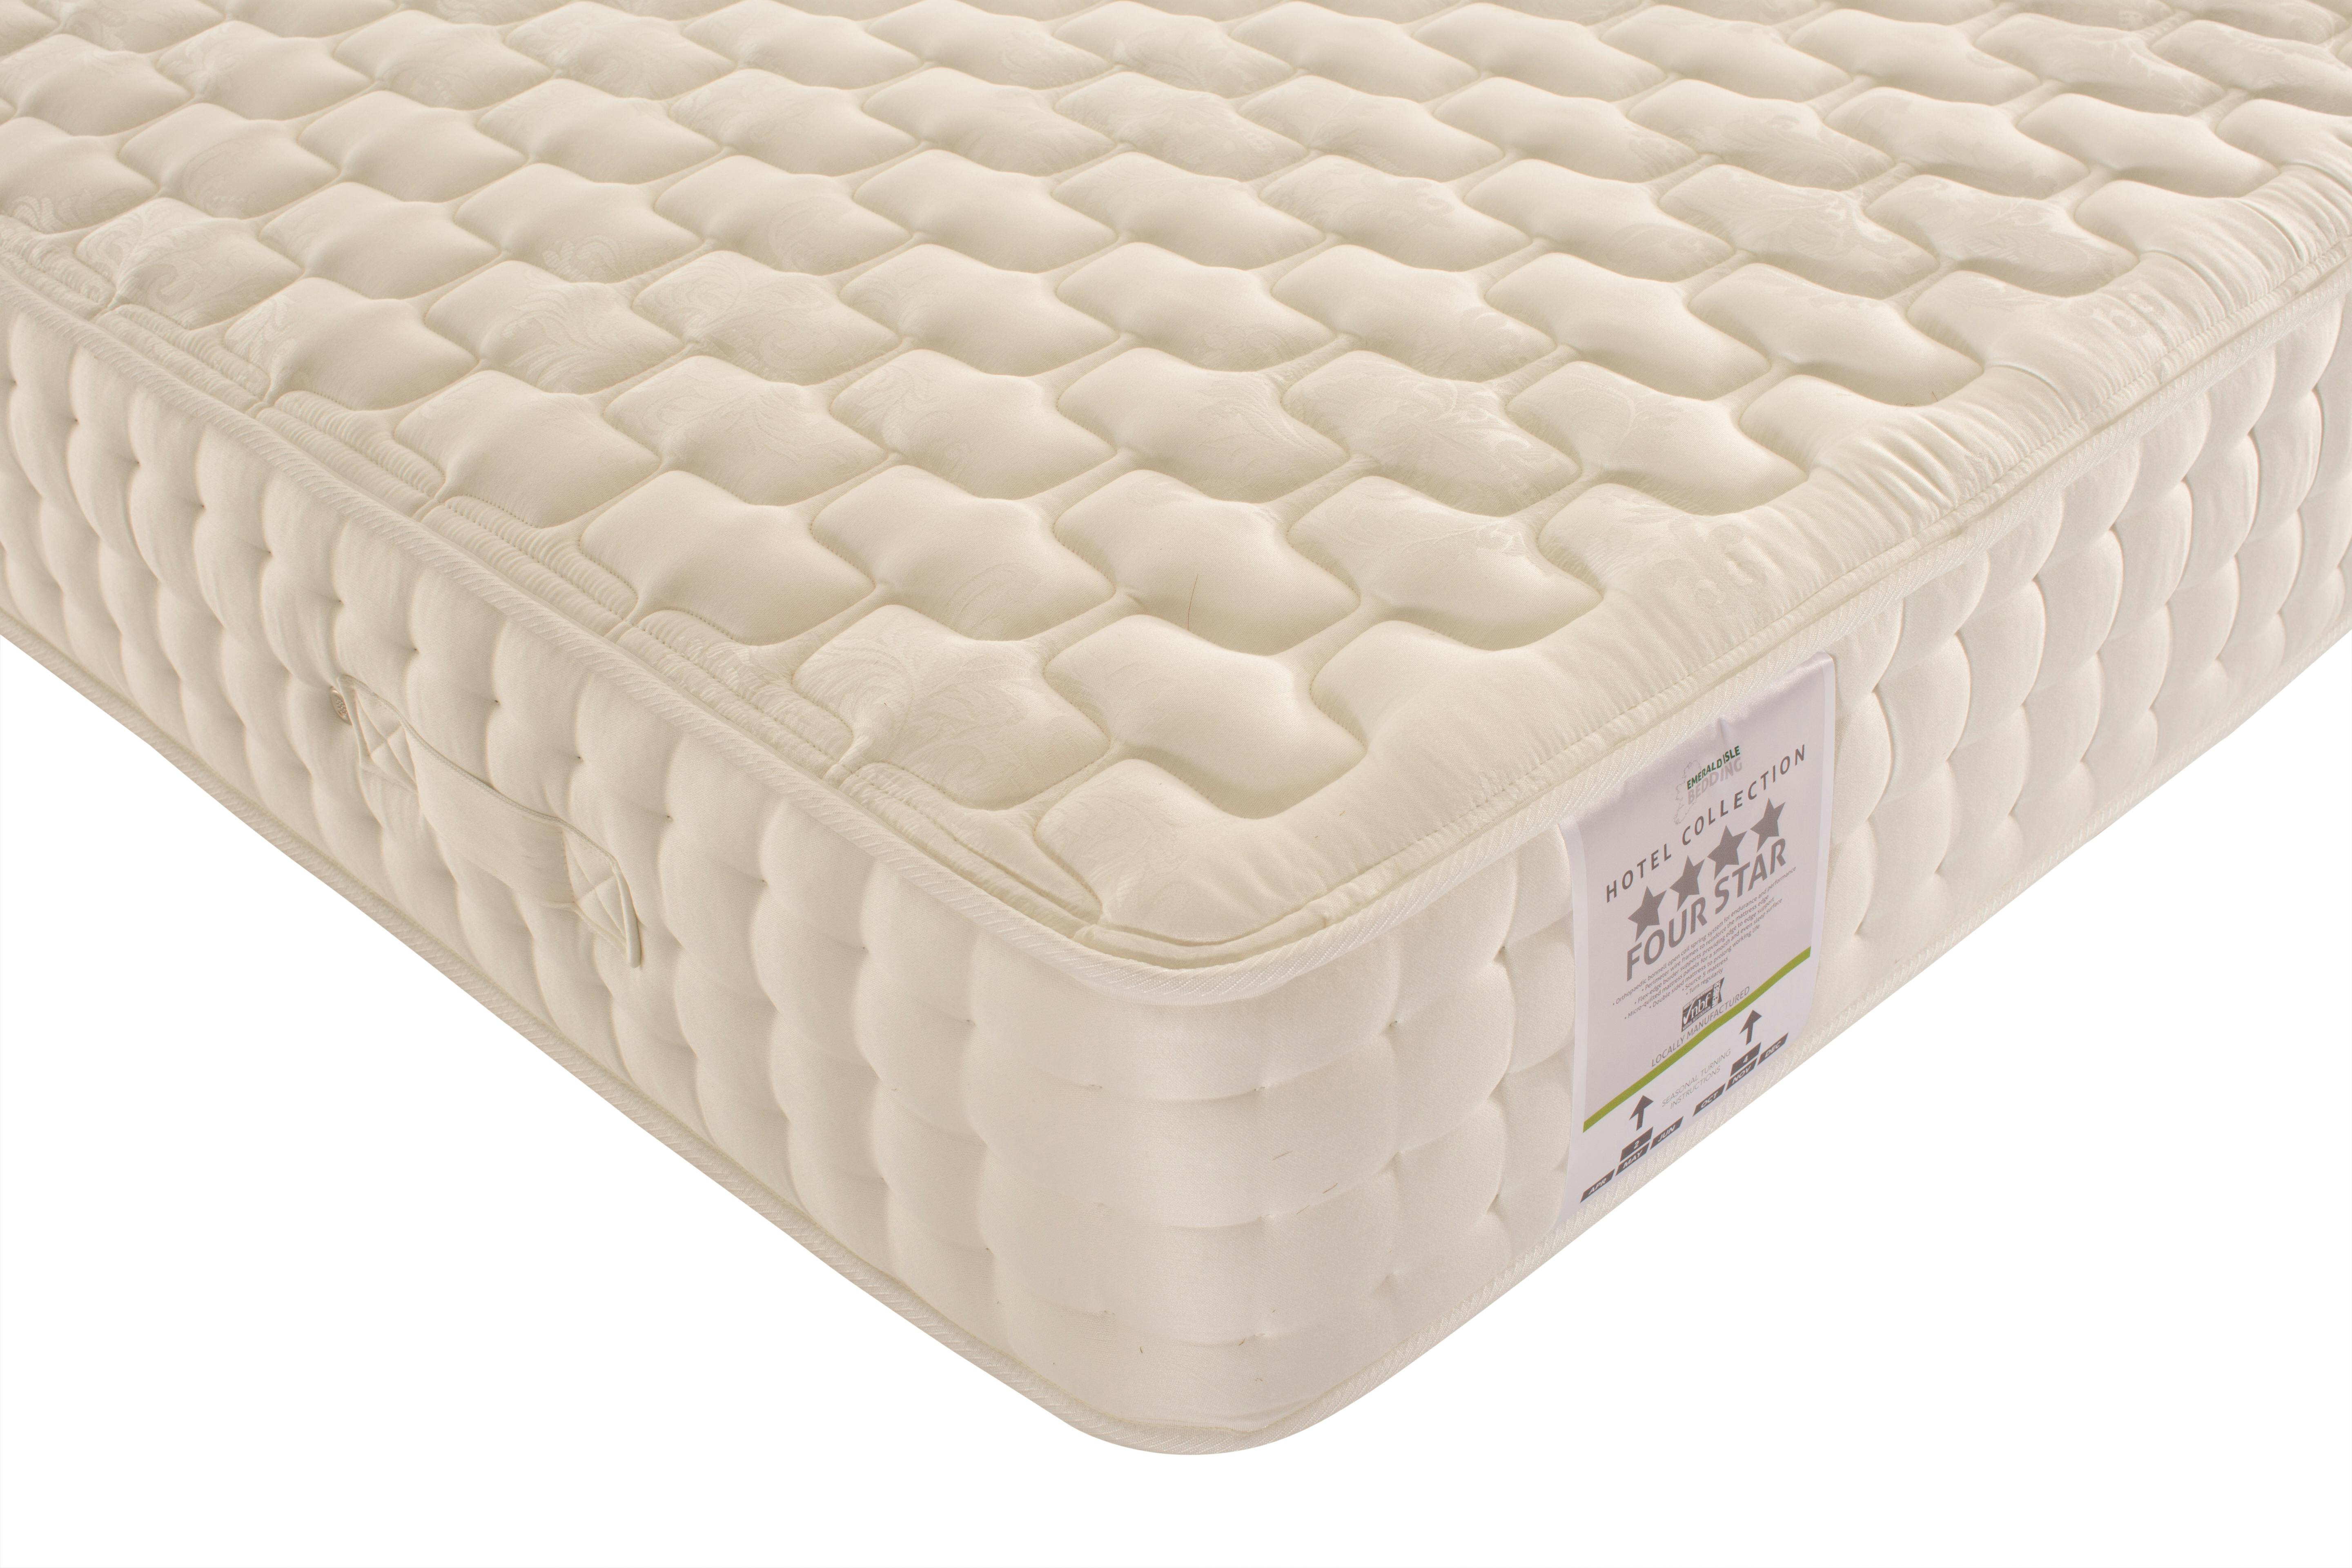 4ft double mattress protector